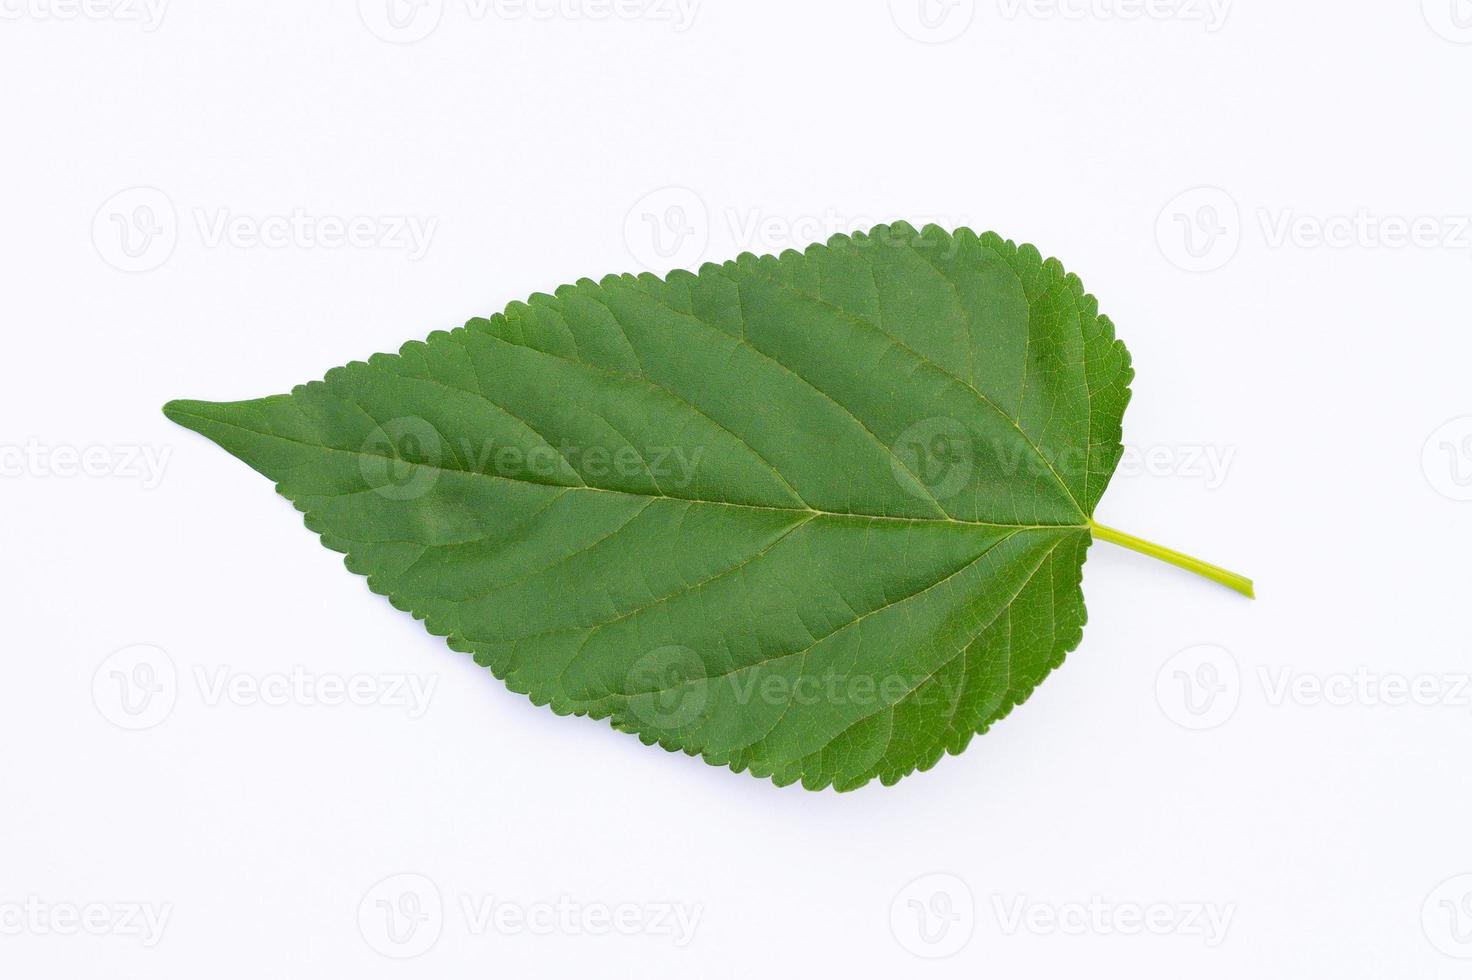 The Mulberry leaf isolate on a white background photo